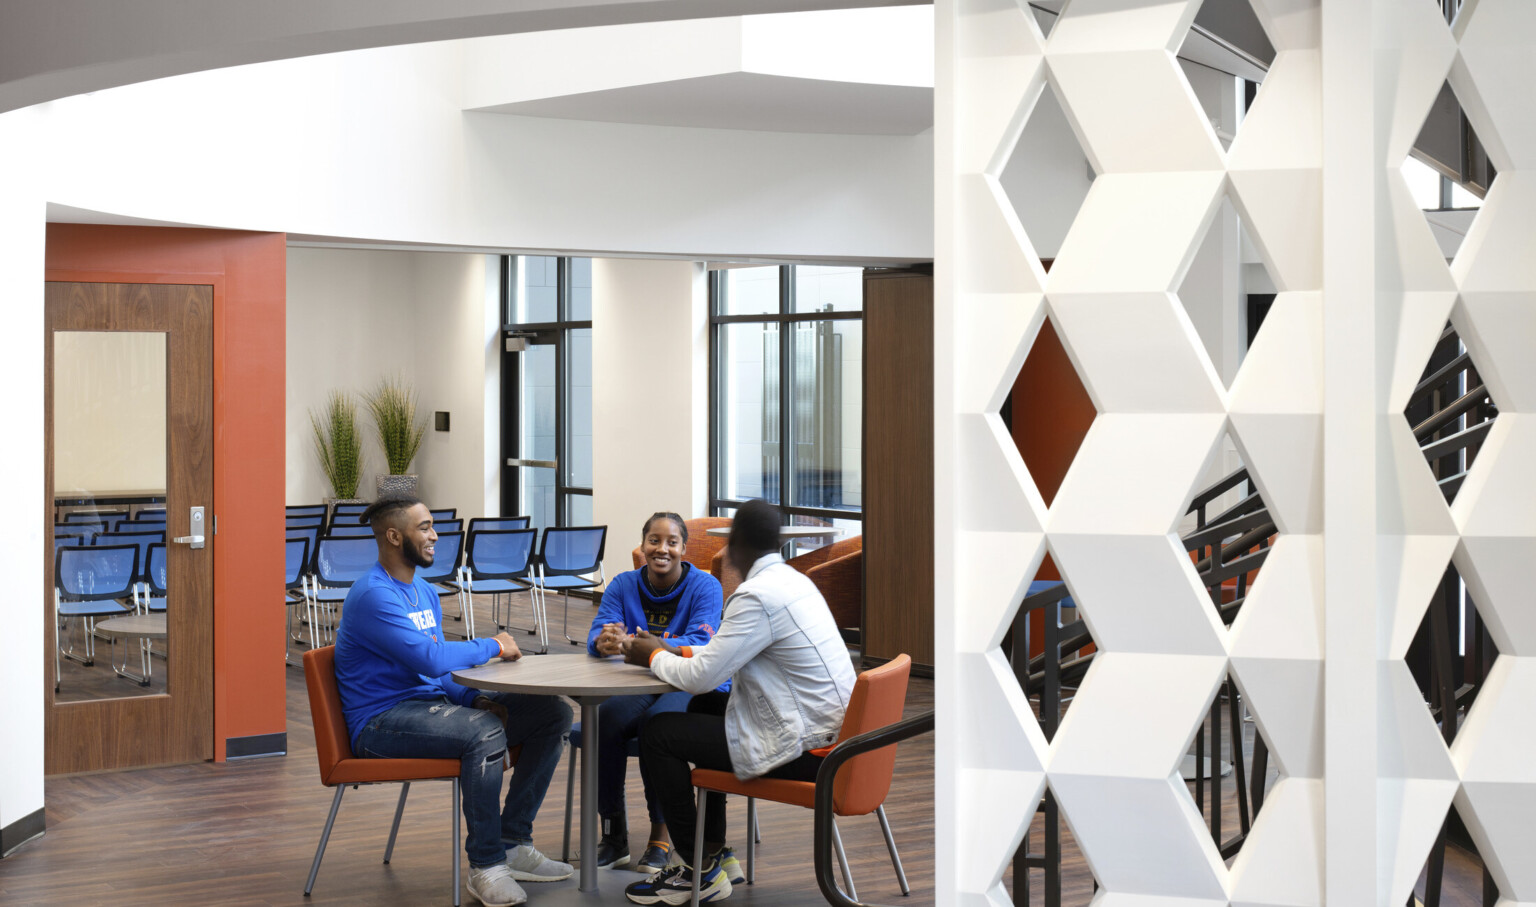 College students chatting, small table, white geometric wall partition, rows of open chair seating for large group, windows, bright, airy, institute of black culture, University of Florida